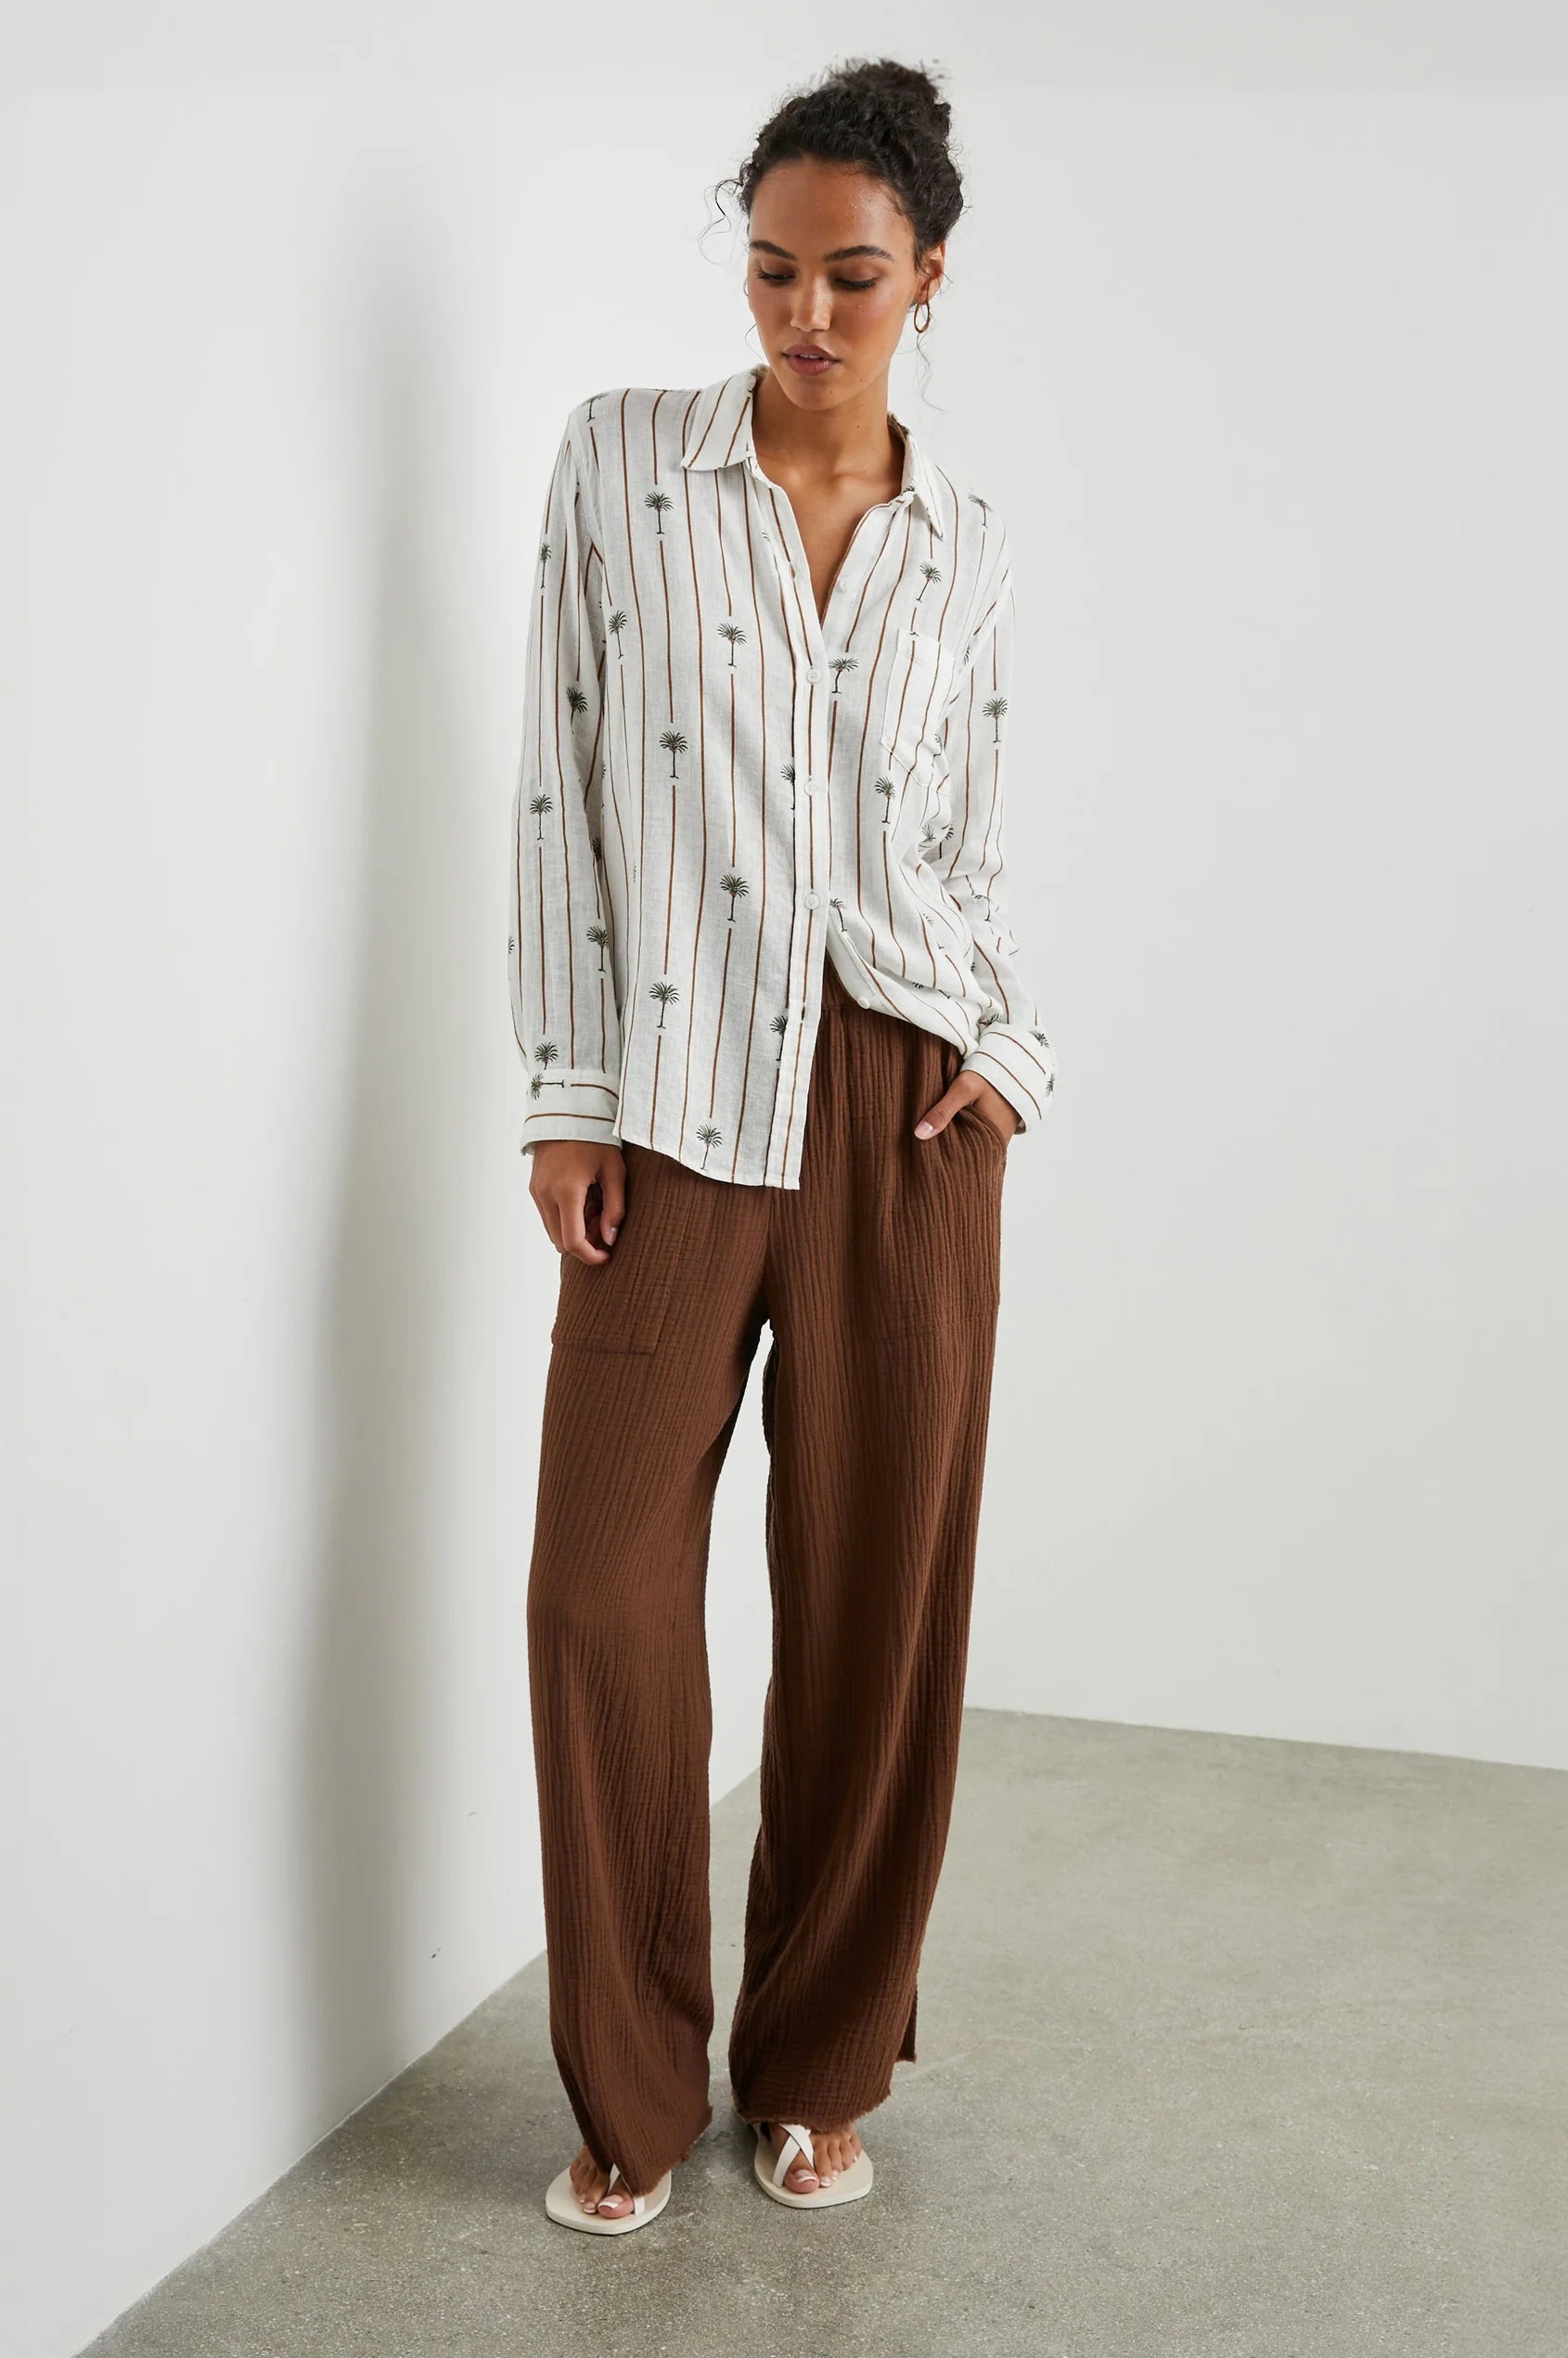 White linen blend shirt with classic collar and button through with brown vertical stripes and palm trees